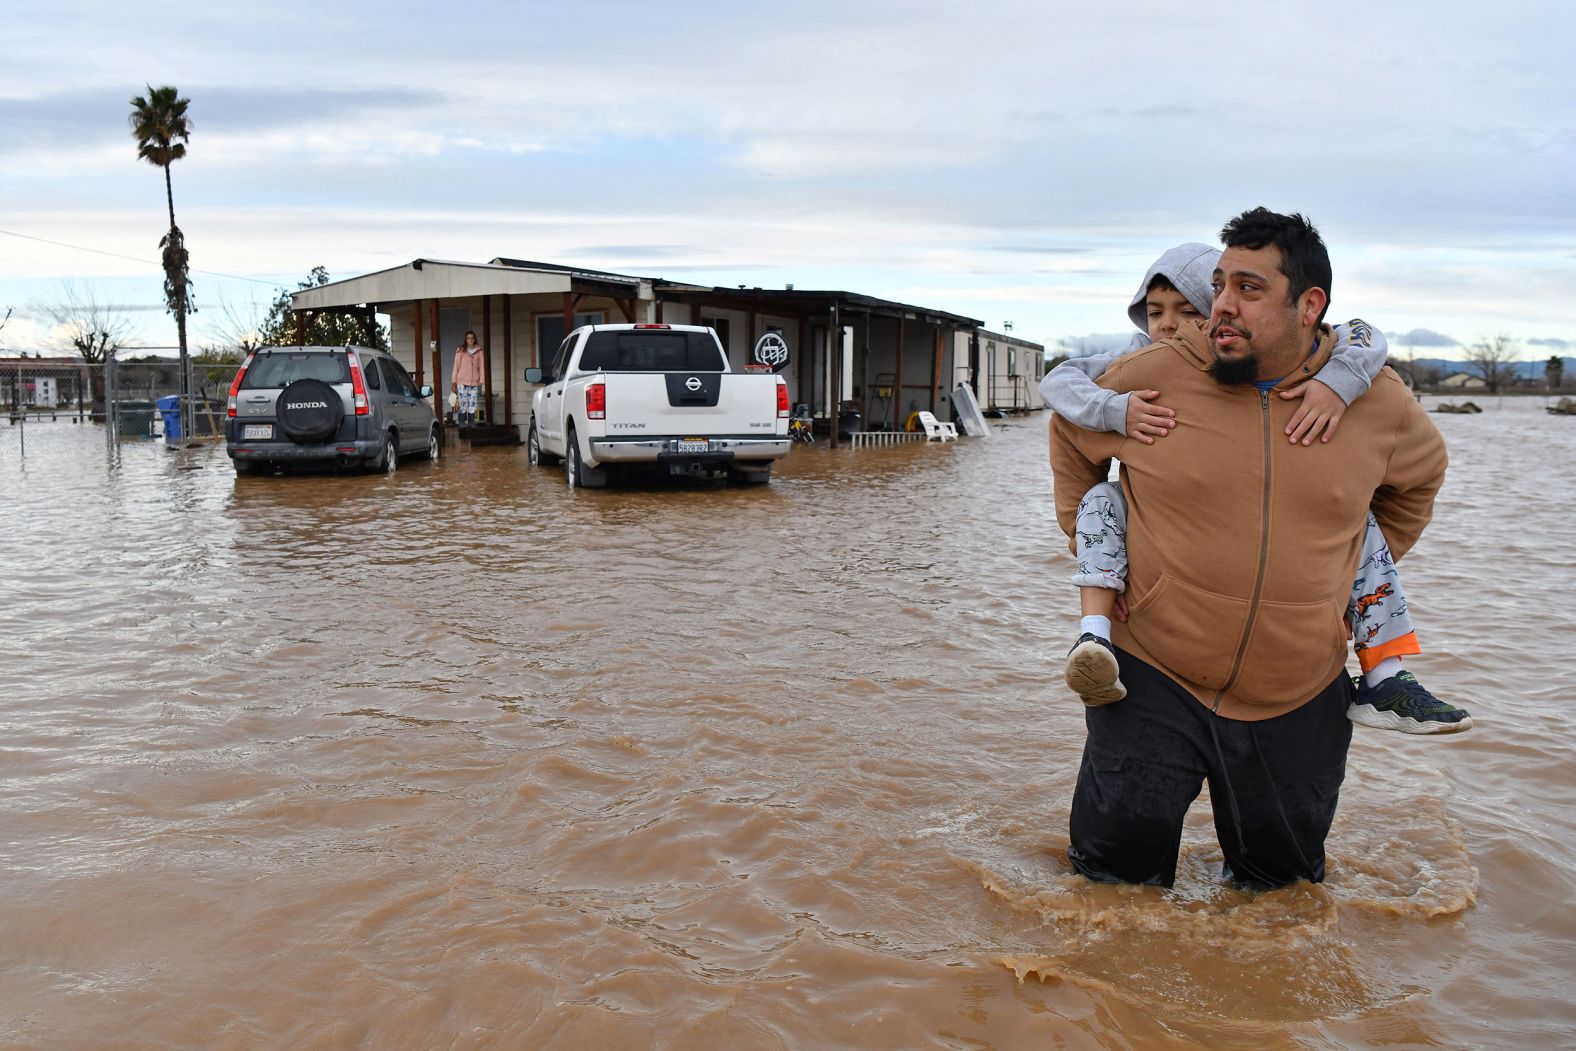 Ryan Orosco carries his 7-year-old son, Johnny, on his back while his wife, Amanda, waits on the front porch to be rescued from their flooded home in Brentwood, California, on Sunday, January 15. The state has recently been battered by <a href="index.php?page=&url=https%3A%2F%2Fwww.cnn.com%2F2023%2F01%2F12%2Fweather%2Fcalifornia-flooding-atmospheric-river-thursday%2Findex.html" target="_blank">a cascade of atmospheric rivers</a> — long, narrow regions in the atmosphere that can carry moisture thousands of miles. Streets have turned into rivers while trees have been toppled, homes lost power, rivers swelled and major roadways were shuttered. <a href="index.php?page=&url=https%3A%2F%2Fwww.cnn.com%2F2023%2F01%2F10%2Fweather%2Fgallery%2Fcalifornia-weather-flooding%2Findex.html" target="_blank">See more photos of California flooding.</a>